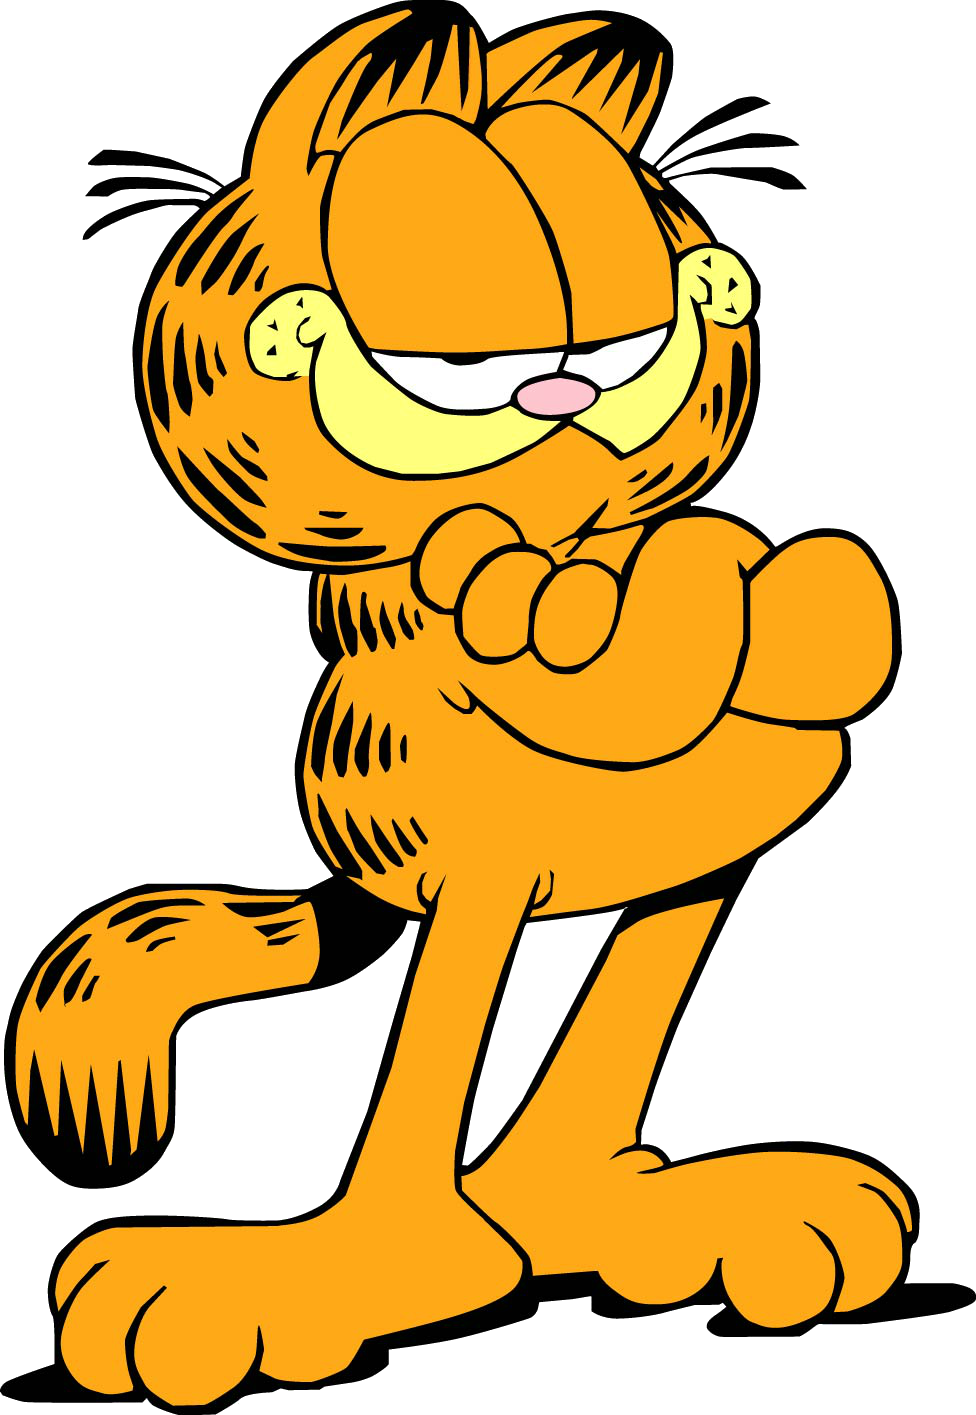 Download PNG image - Garfield Transparent Images PNG 